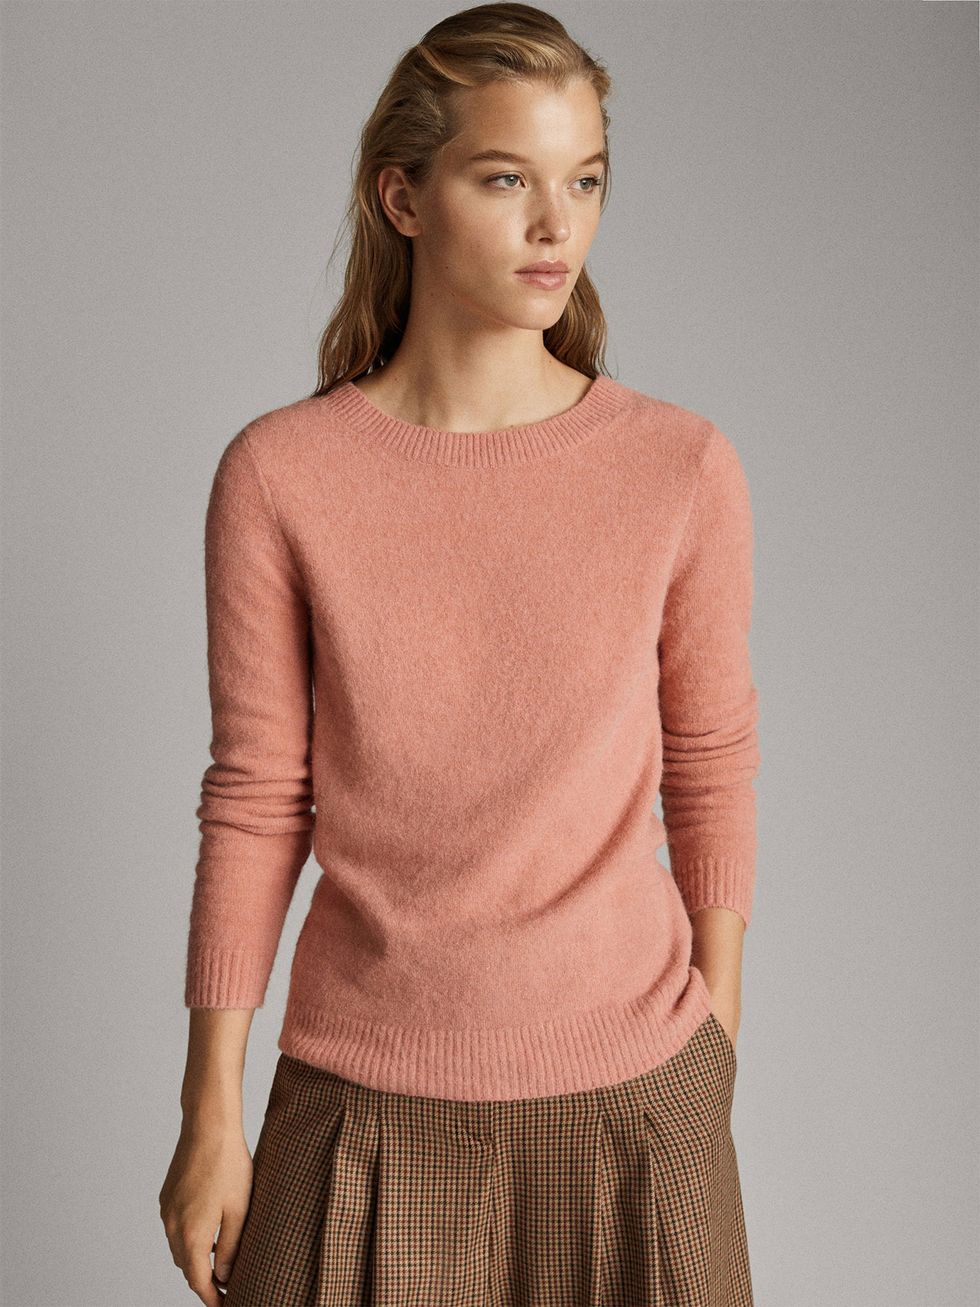 Clothing, Neck, Sleeve, Pink, Sweater, Shoulder, Photo shoot, Outerwear, Fashion, Top, 